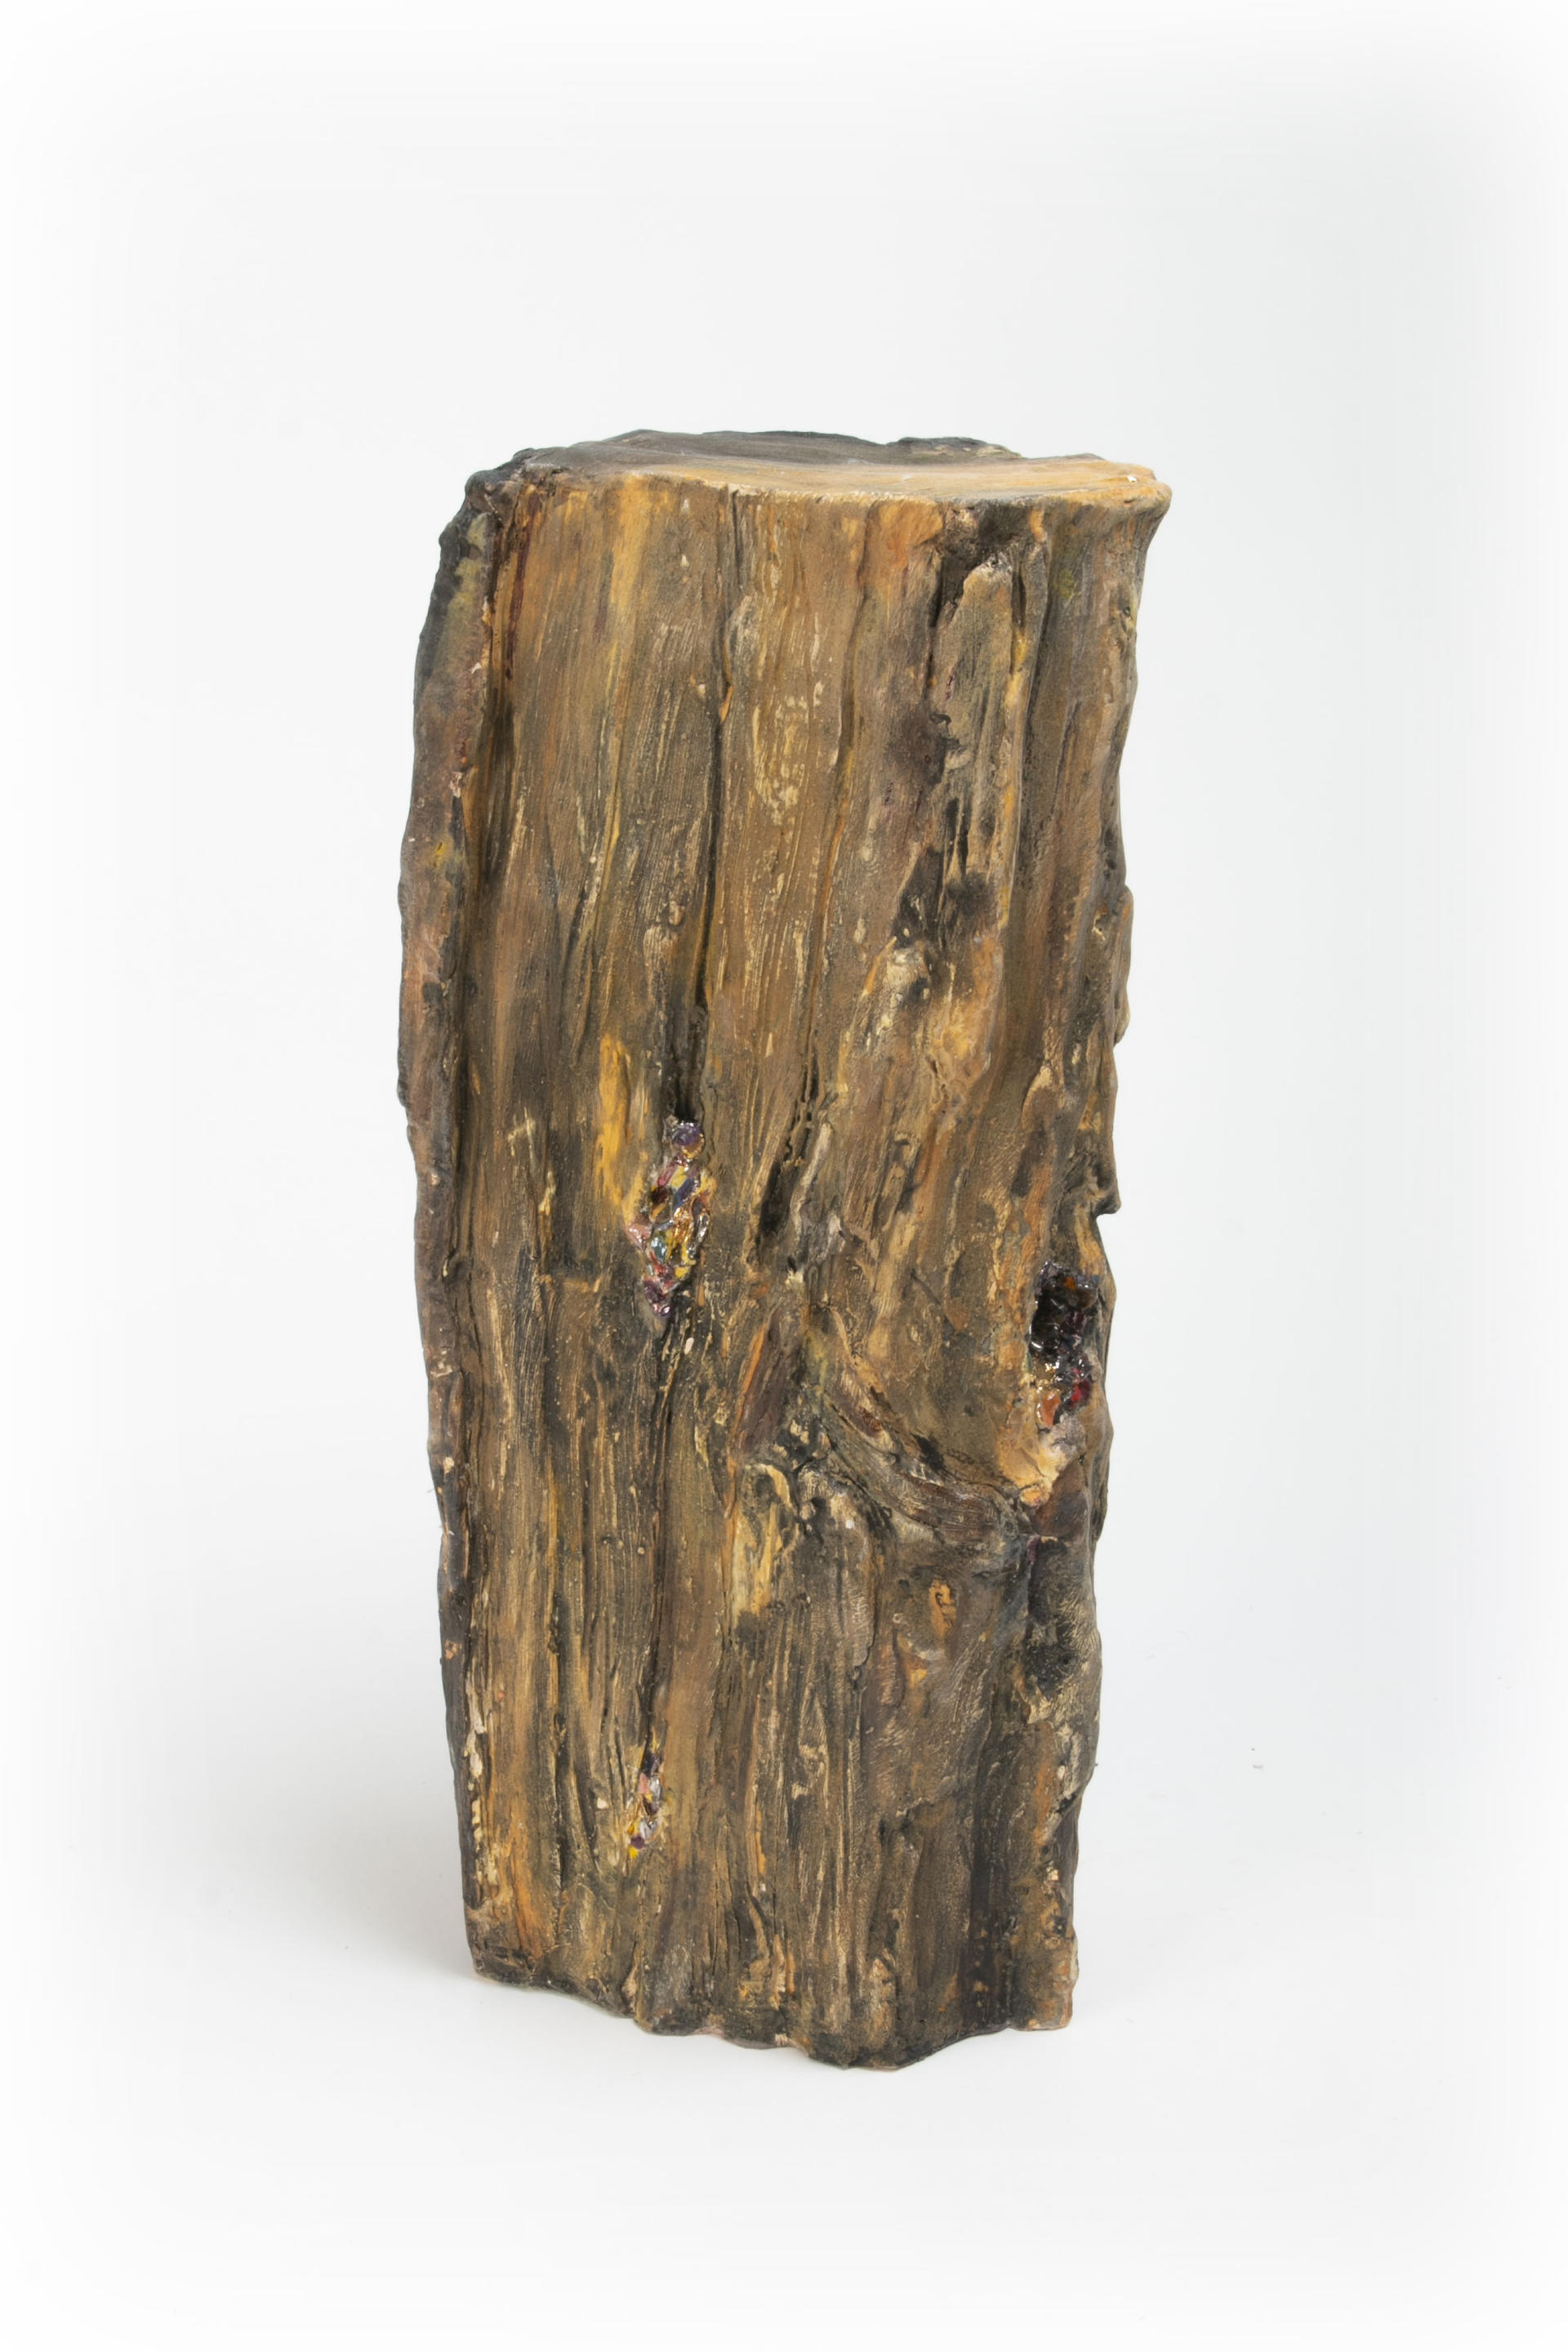 Ceramic sculpture resembling fire wood with shiny confetti spilling out of cracks and knots in wood.